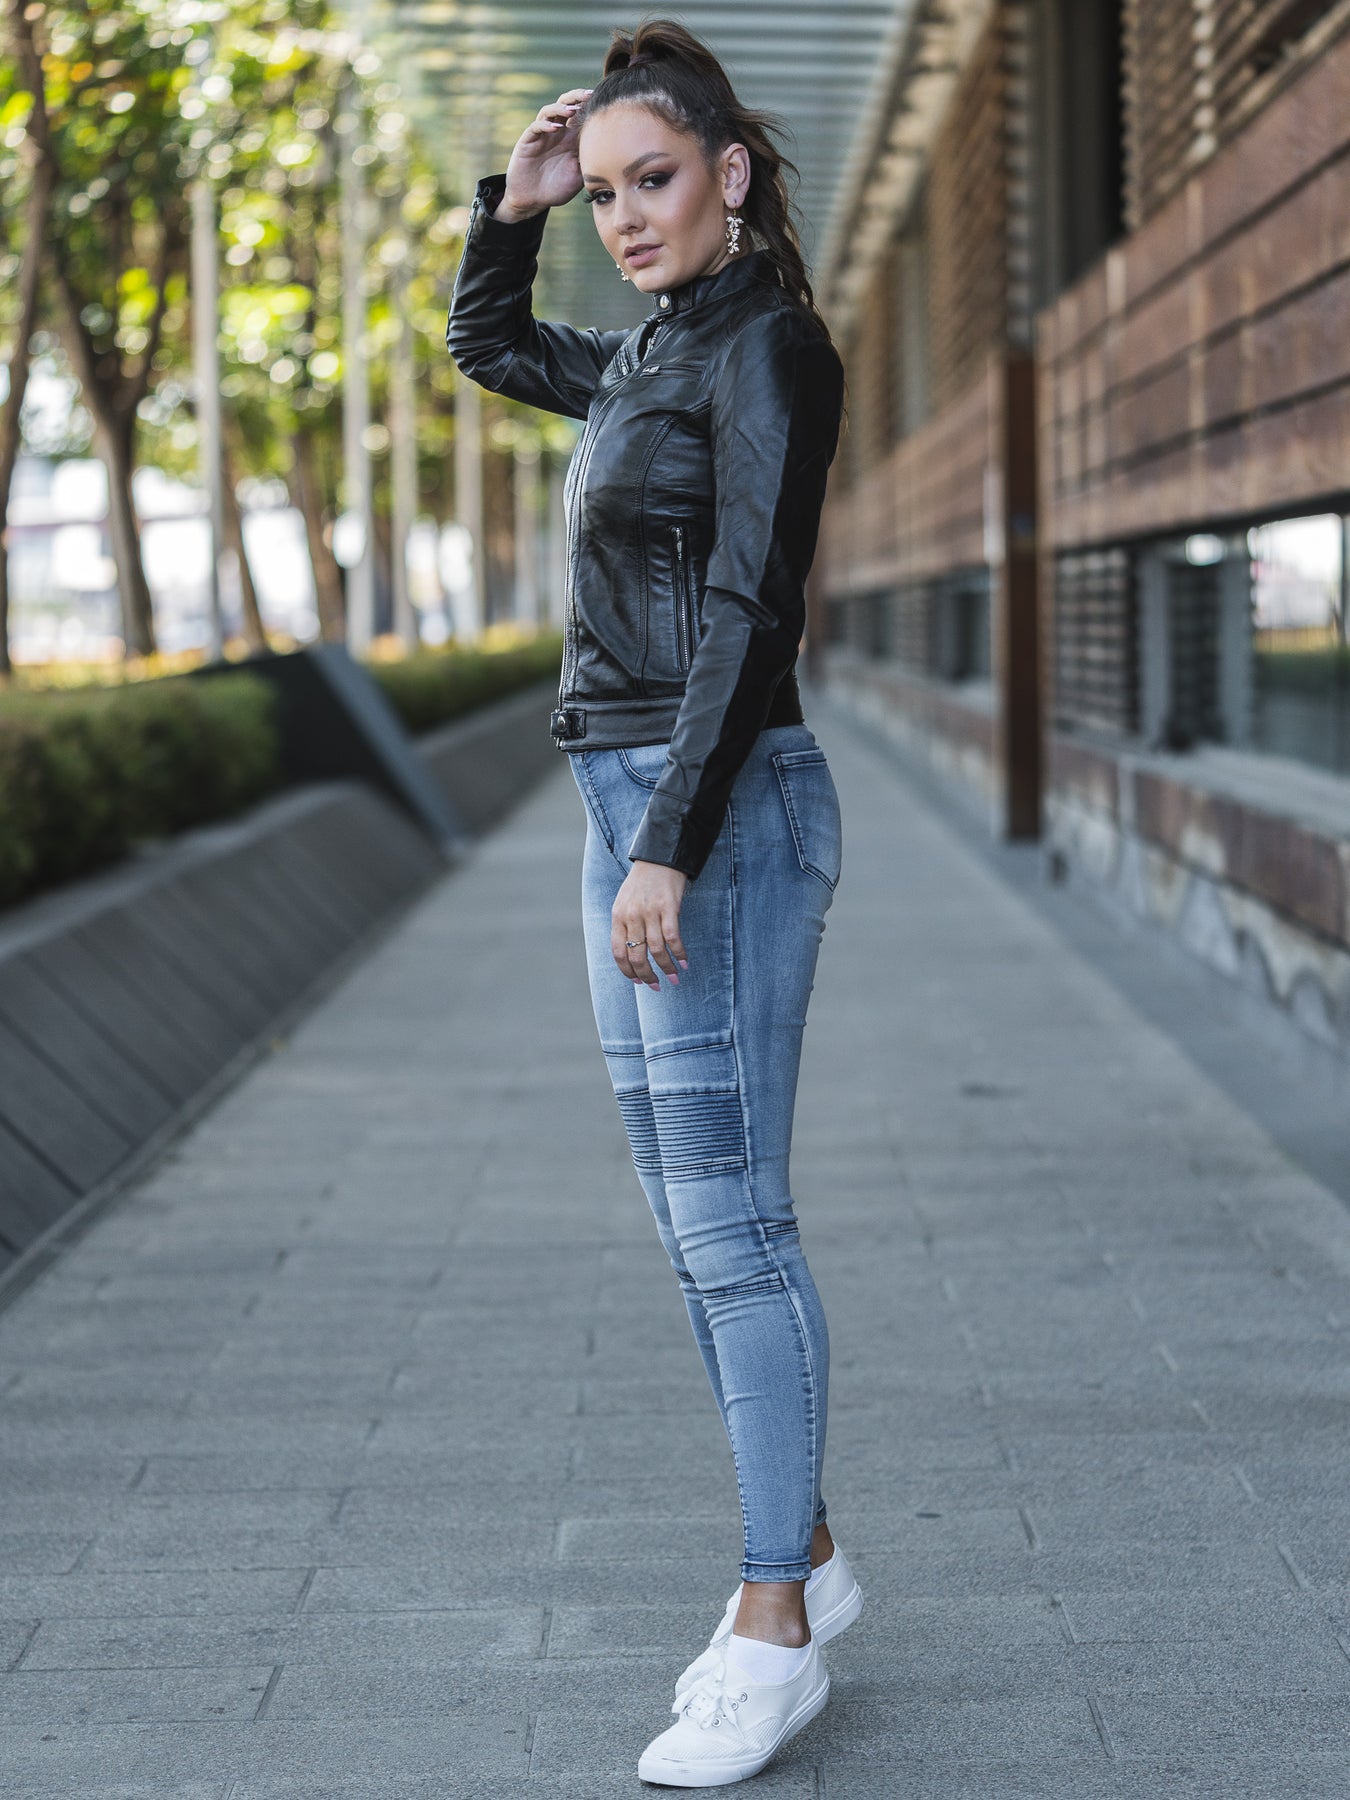 Women's Leather Jackets | Ladies Bomber Leather Jackets | Black Leather  Jackets